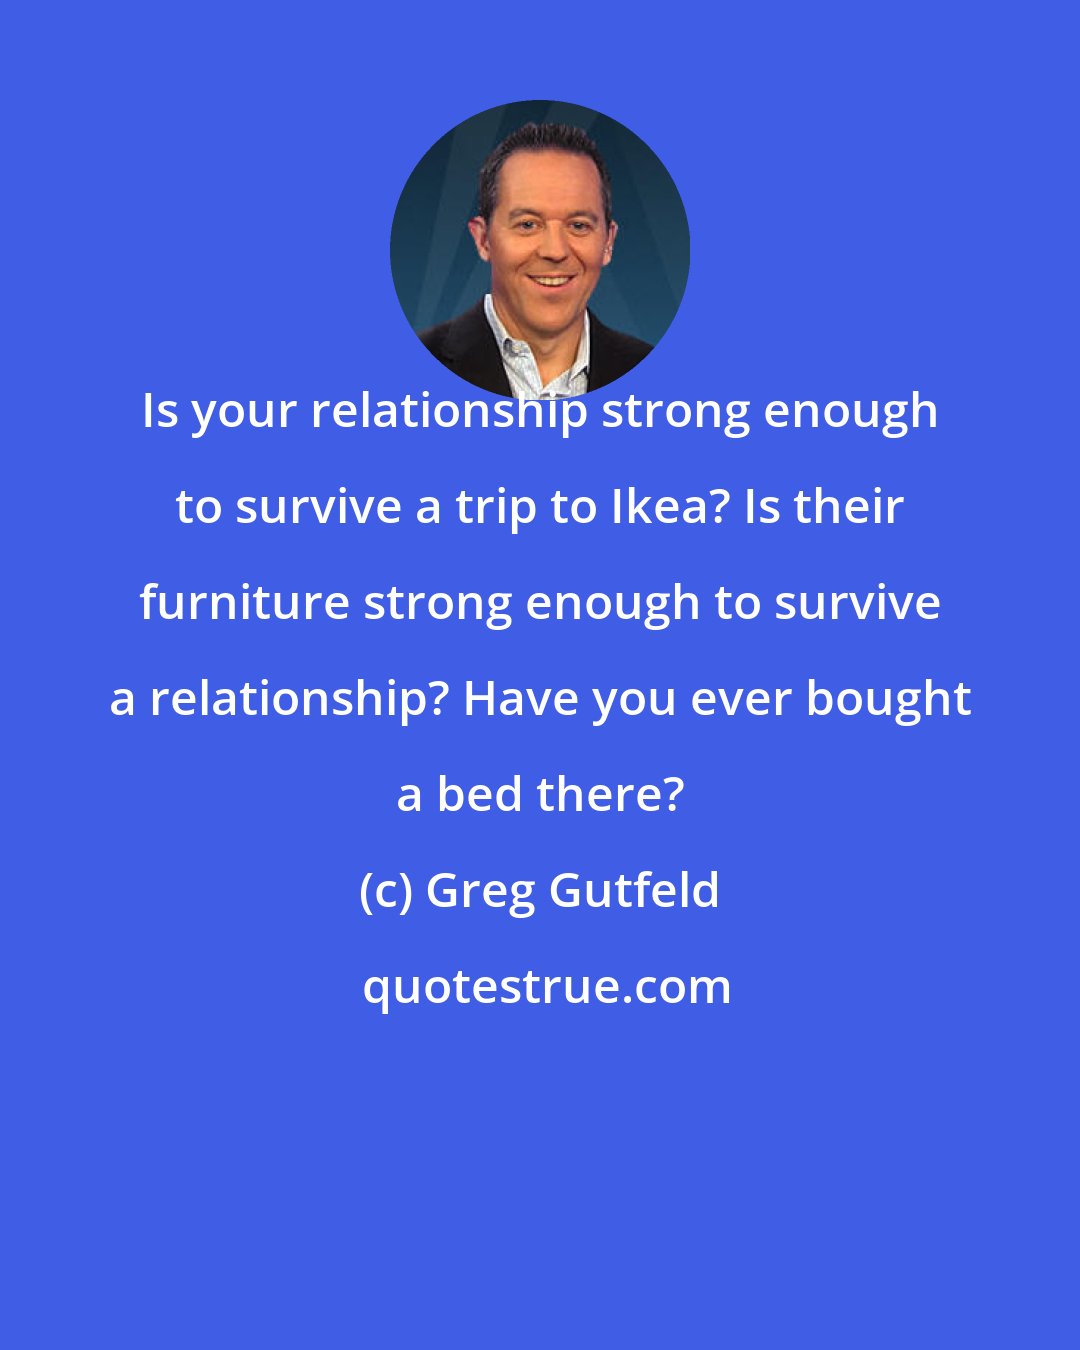 Greg Gutfeld: Is your relationship strong enough to survive a trip to Ikea? Is their furniture strong enough to survive a relationship? Have you ever bought a bed there?